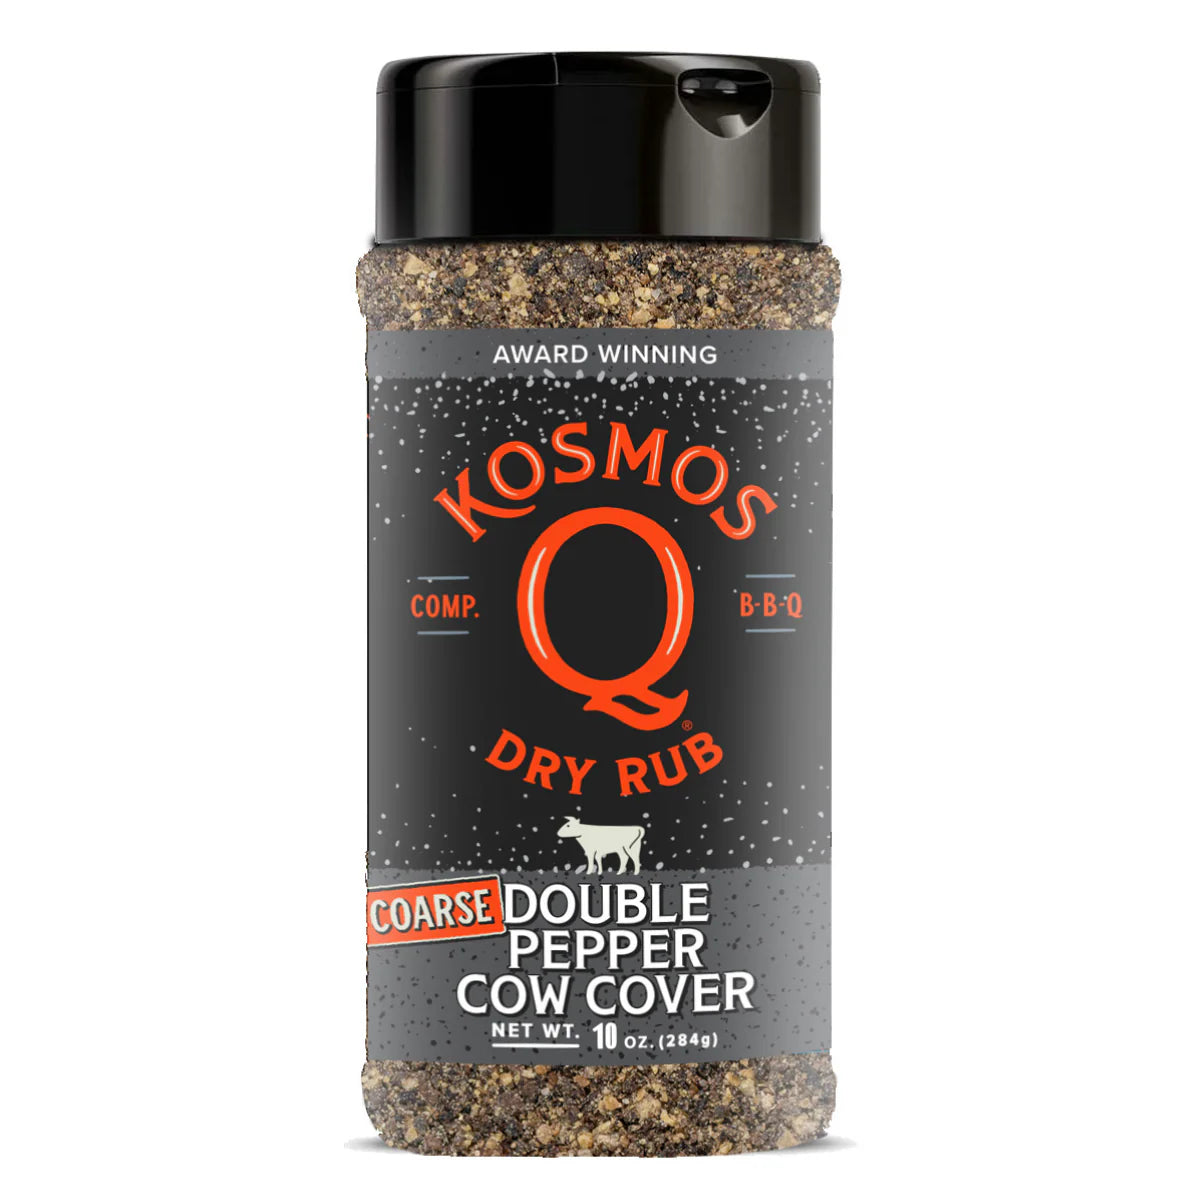 Kosmos Q Double Pepper Coarse Cow Cover